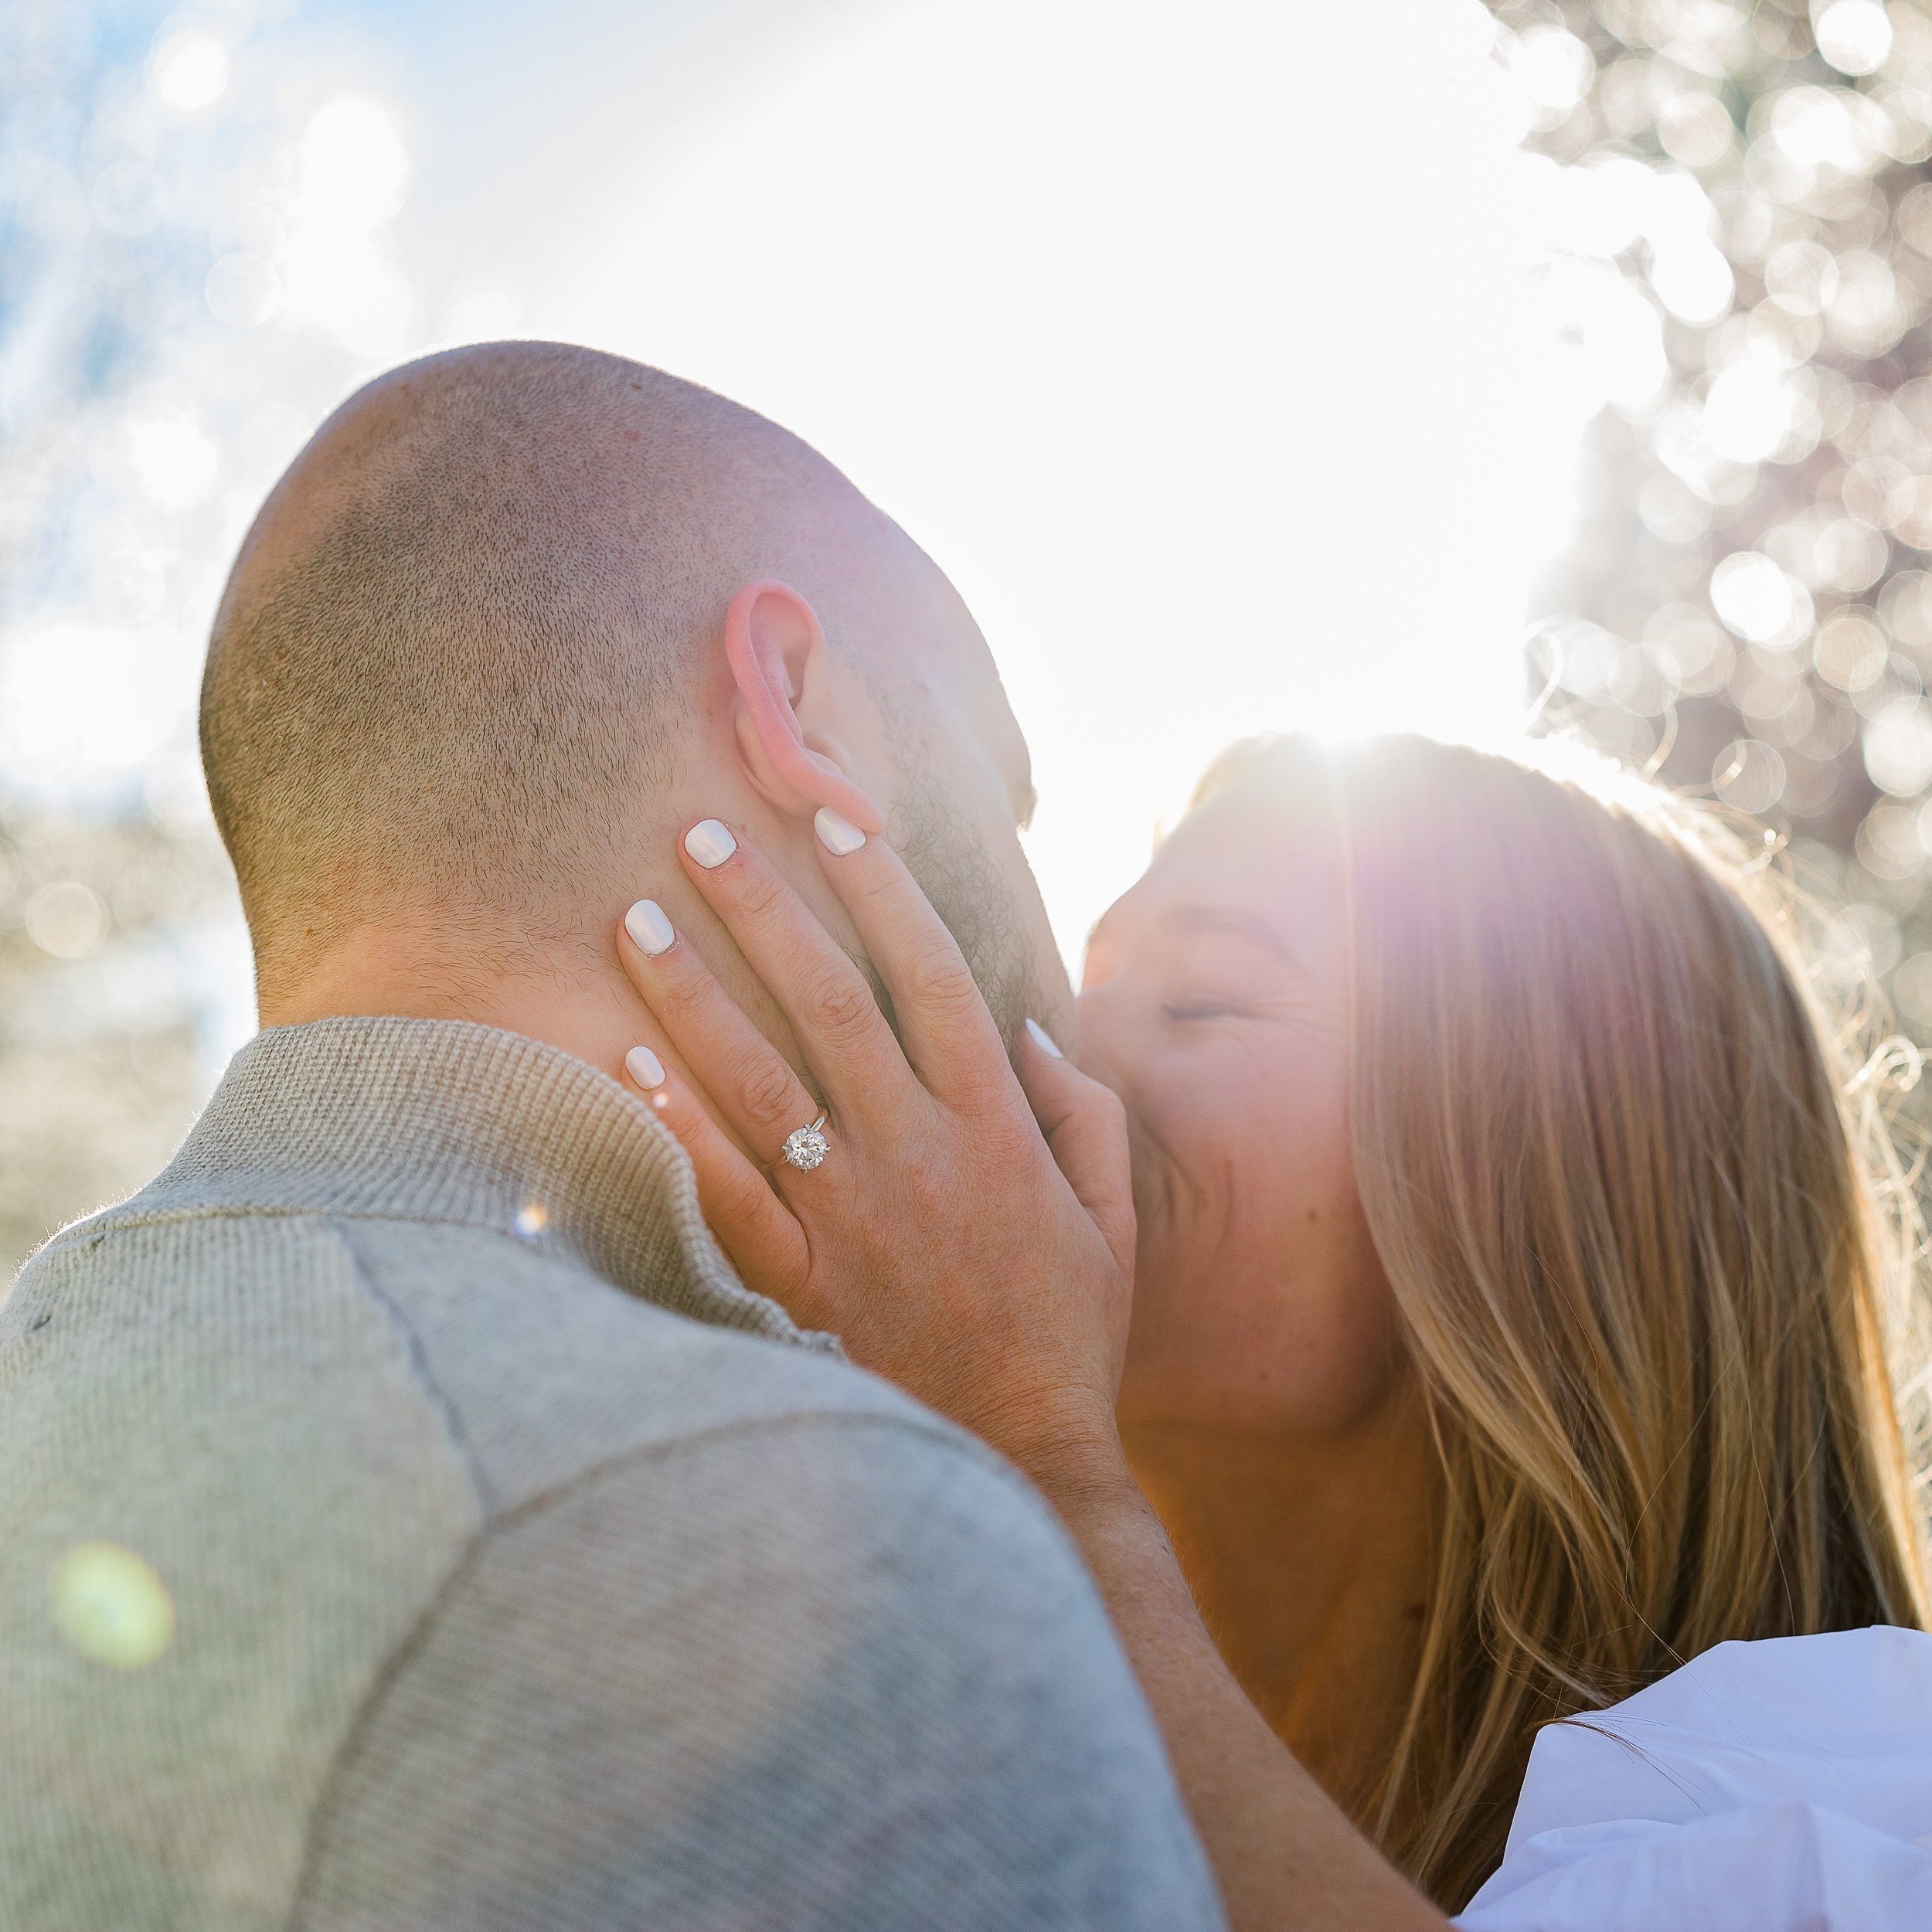 A moment for the ring and the glistening beauty of nature&hellip;

Lake George weddings | Engagement session | Adirondacks wedding photographer | Albany weddings 

#westchesternyweddings #westchesterengagementphotographer #albanyengagementphotographe